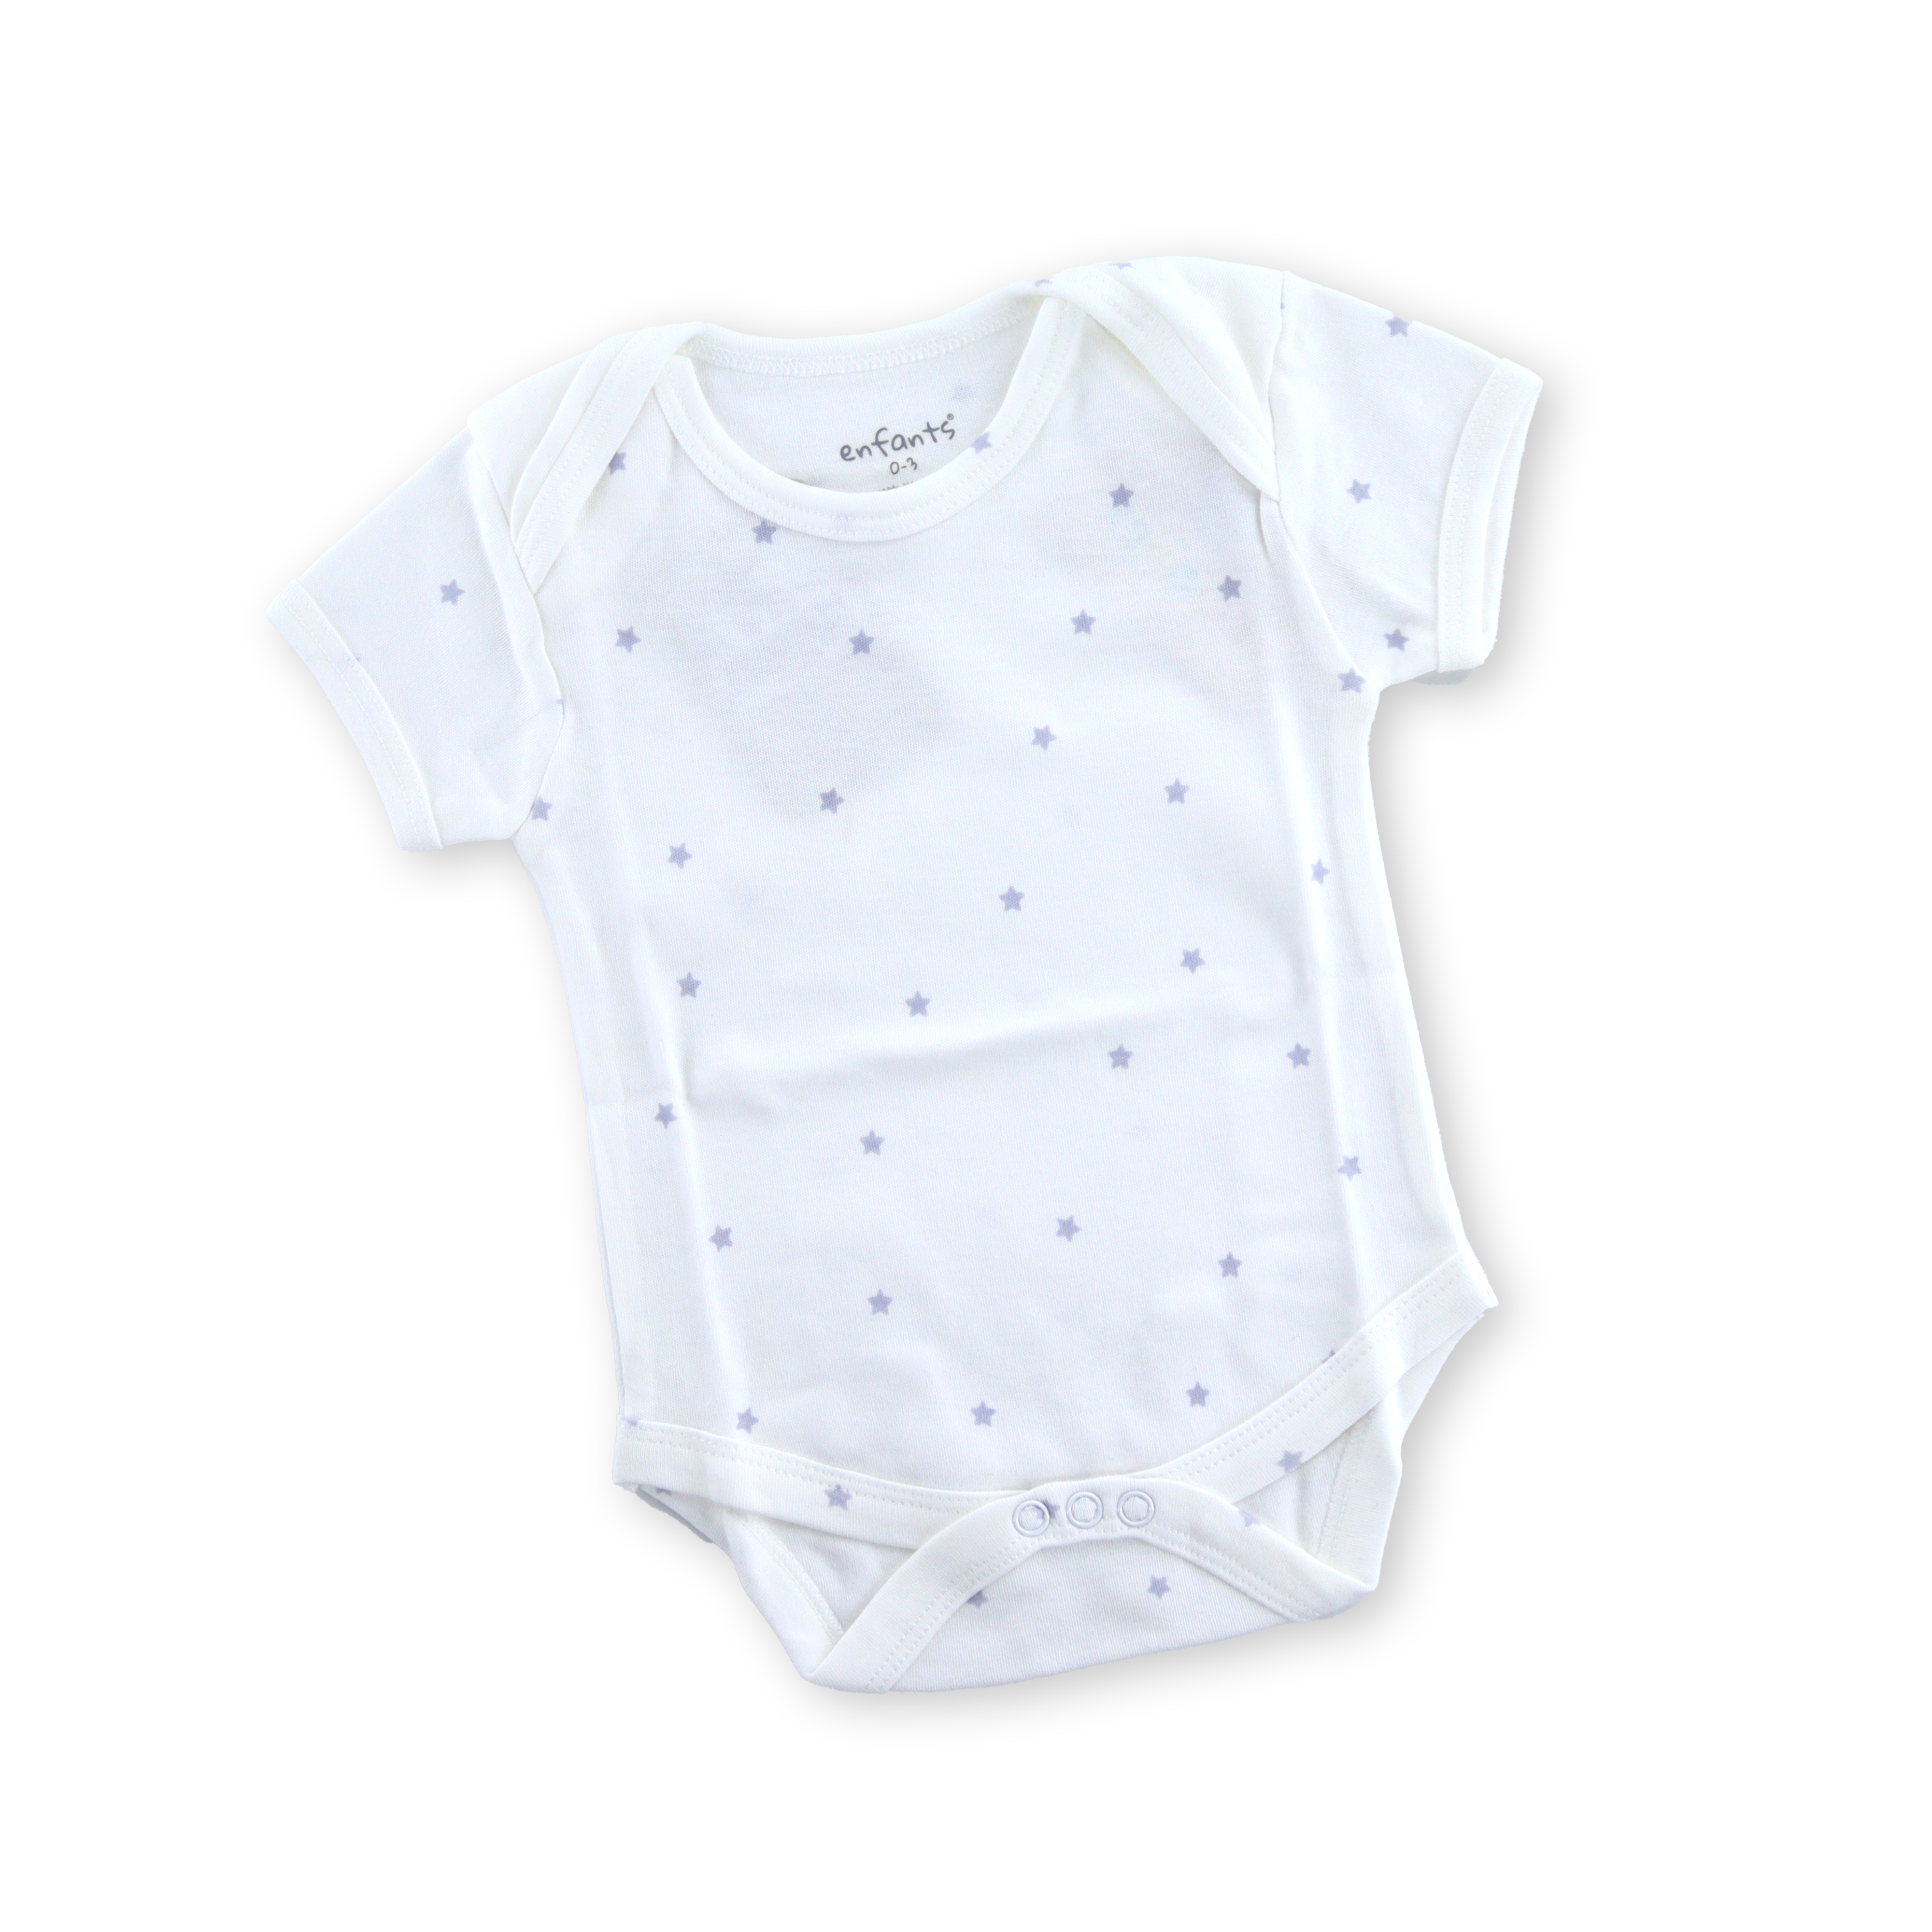 Infants Baby Romper/Onesies/Jumpsuit with Soft Cotton for Baby Boys/Girls (0-3months/3-6months)